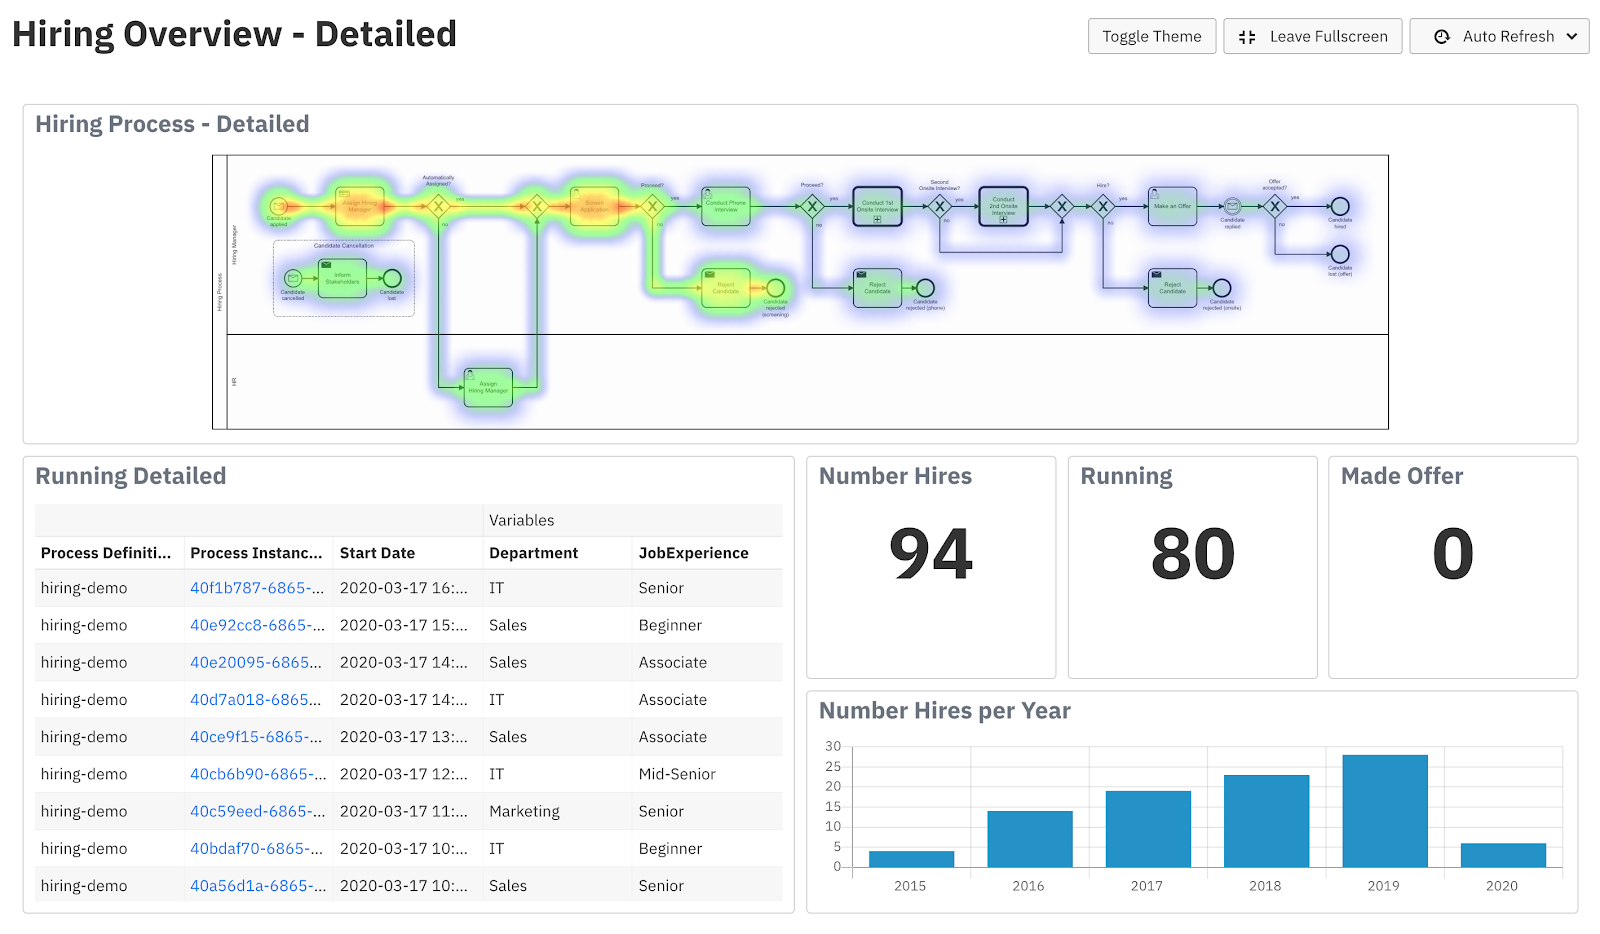 Announcing Optimize 3.0: Any Data Source, True End-to-End Process Visibility